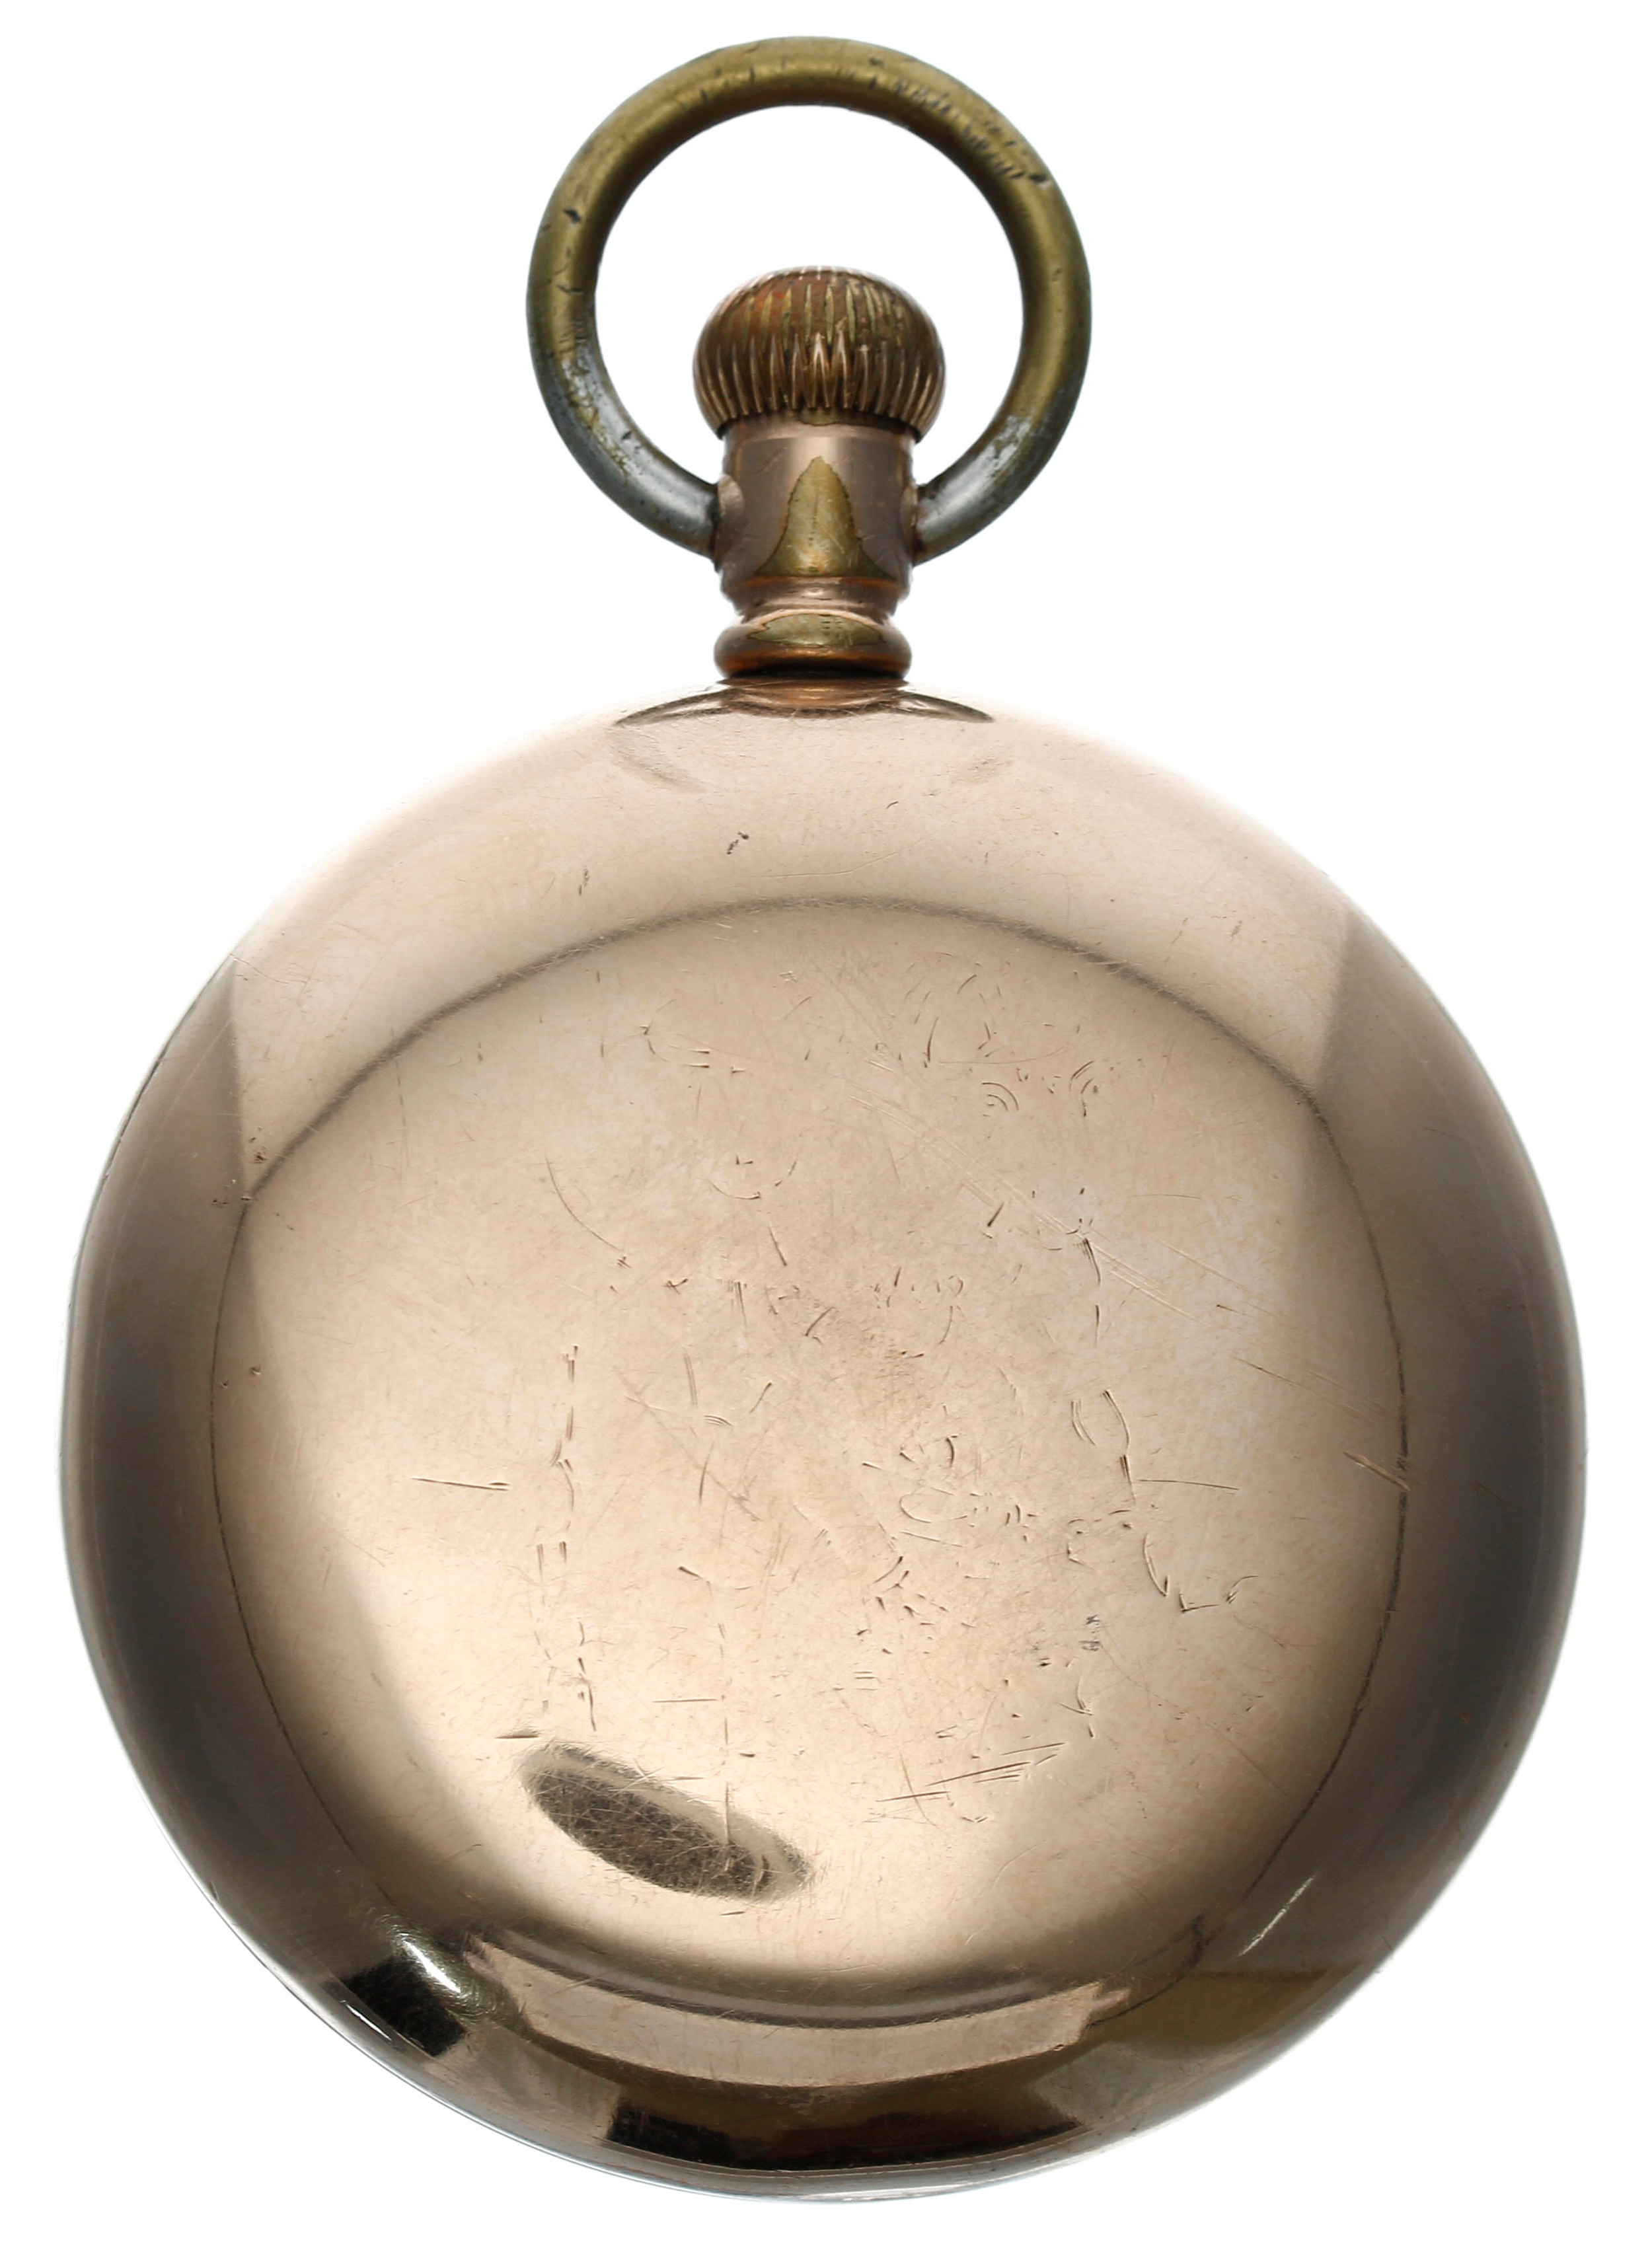 American Waltham 'Appleton Tracy & Co.' gold plated lever pocket watch, circa 1900, signed 17 - Image 4 of 4